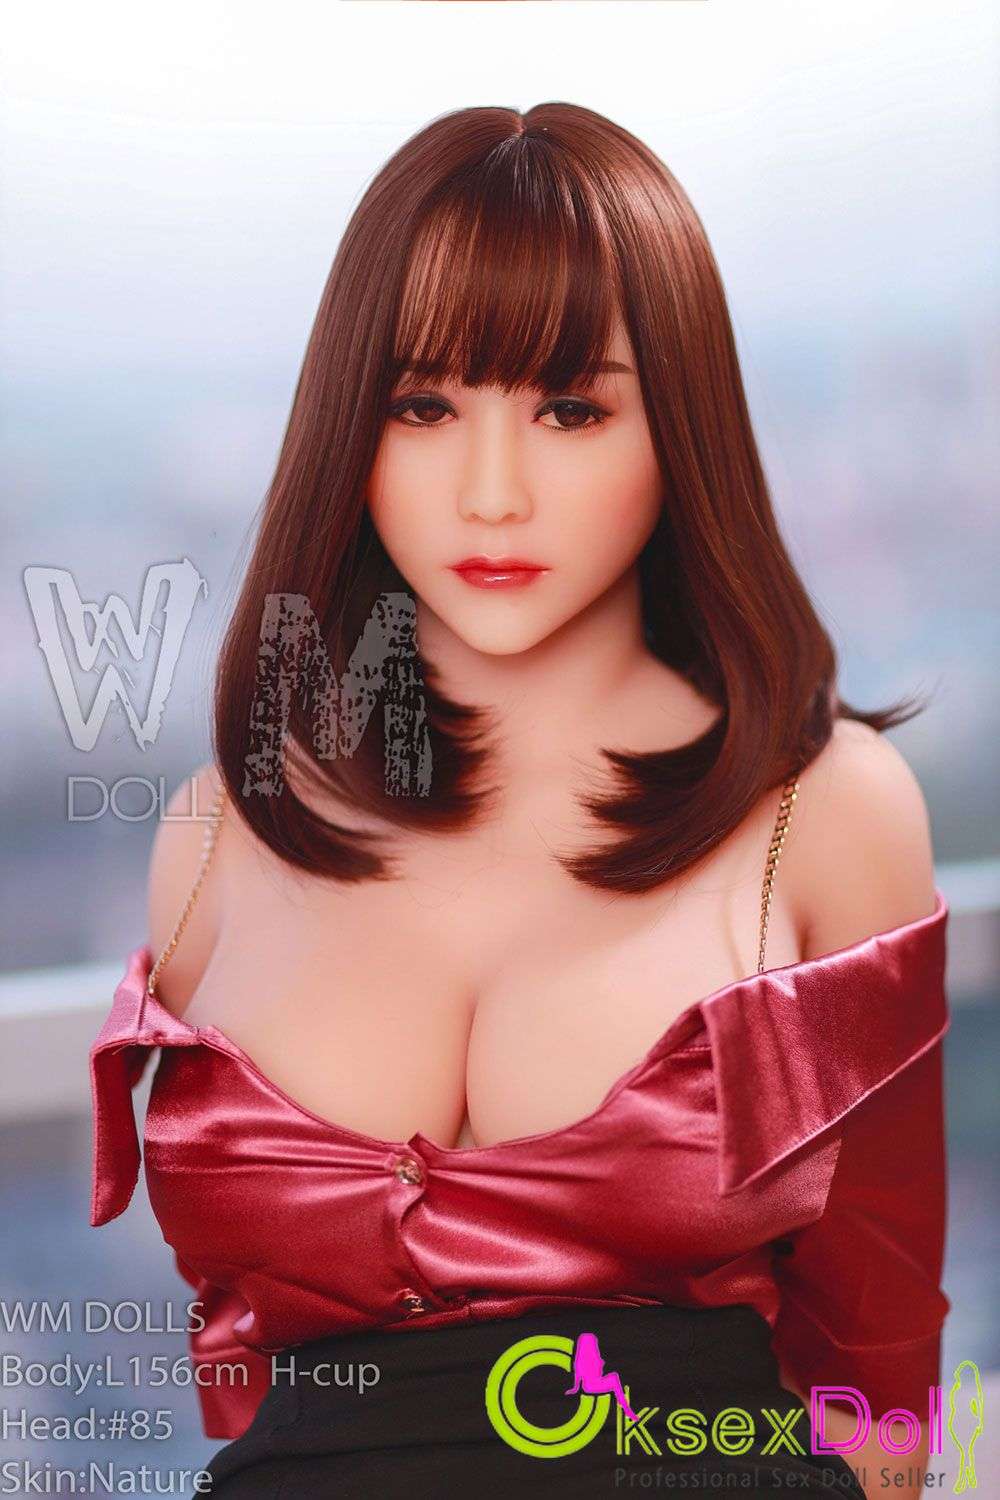 Fat Sex Doll Images of Kimi